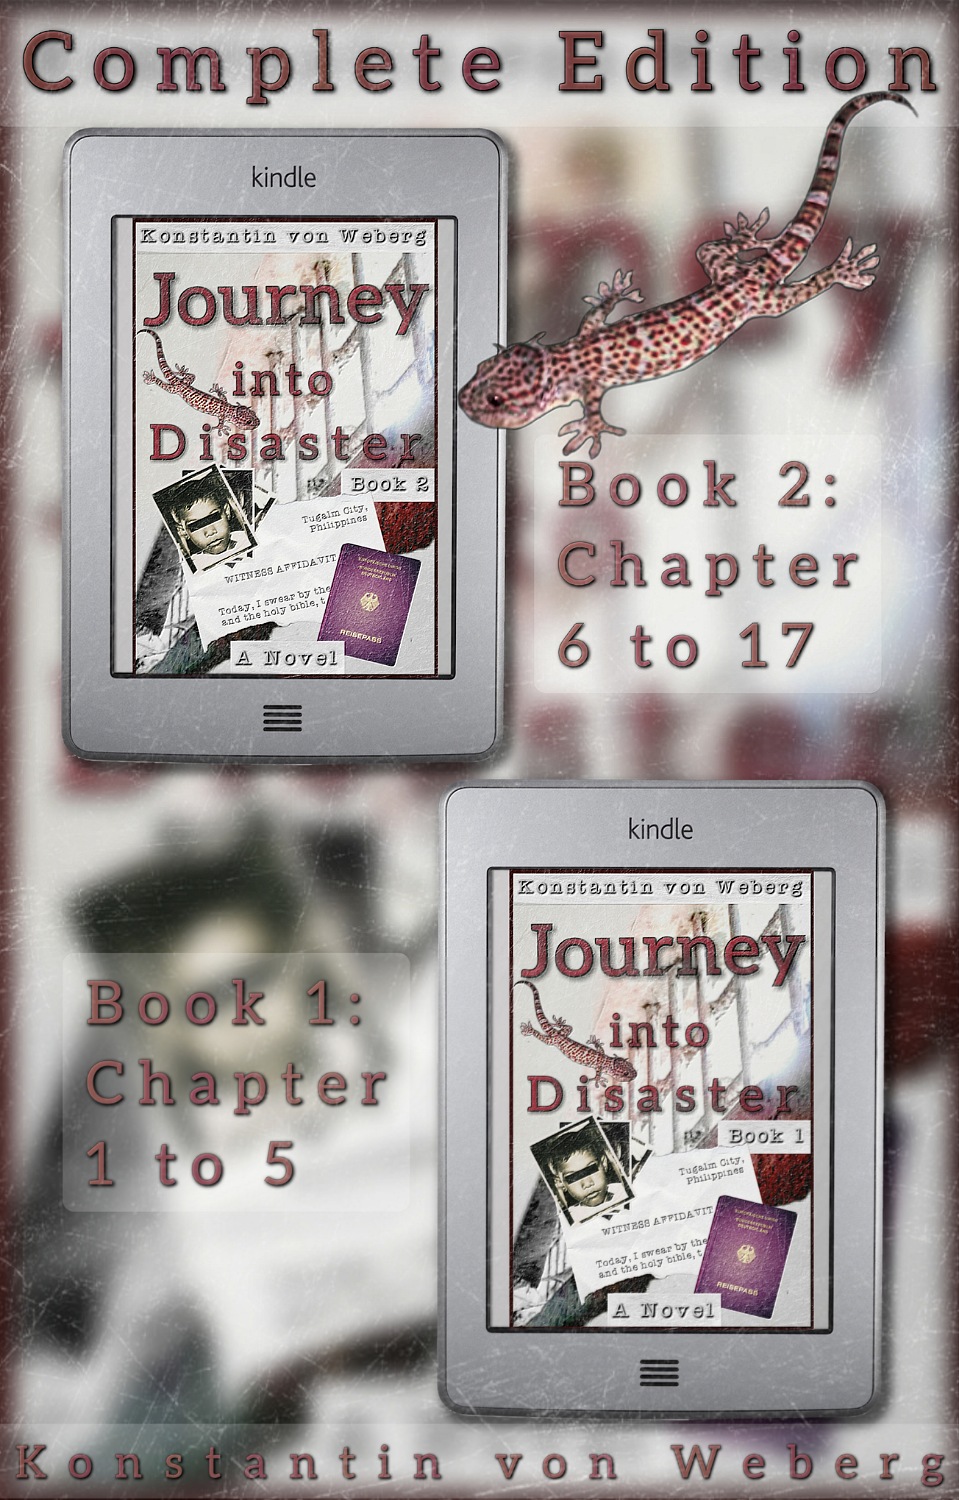 New Complete Edition of ‚Journey into Disaster‘ on Amazon • Now with X-ray!